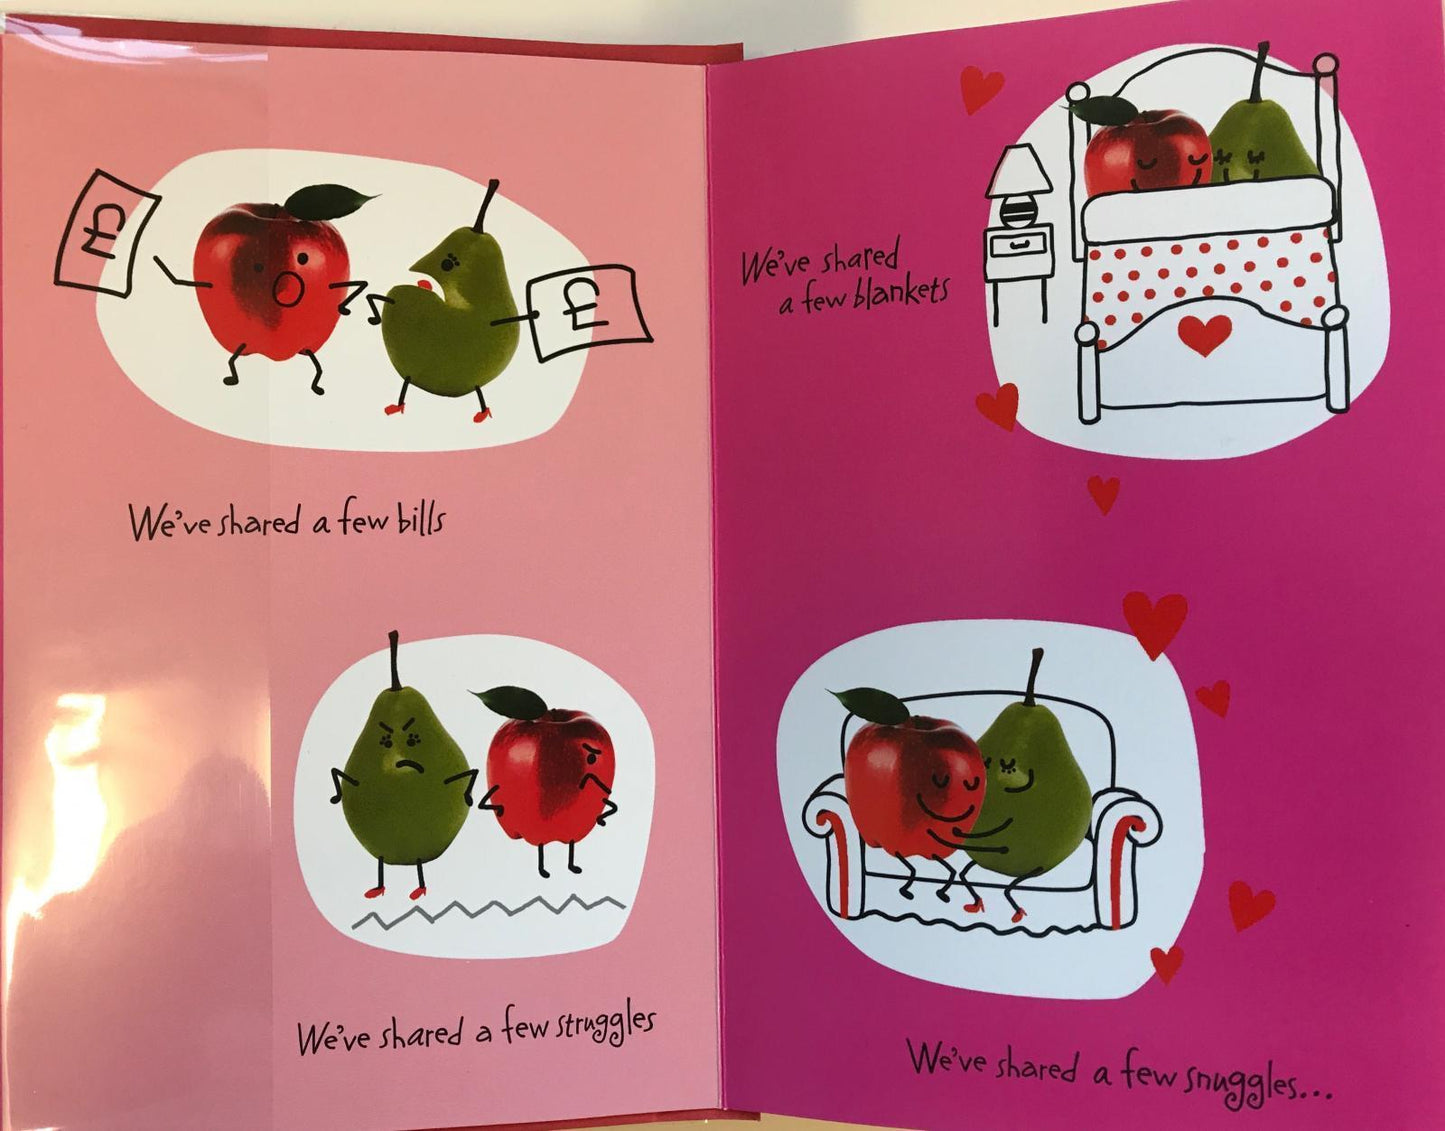 One I Love Cute Lovely Humour Verse Valentine's Day Card